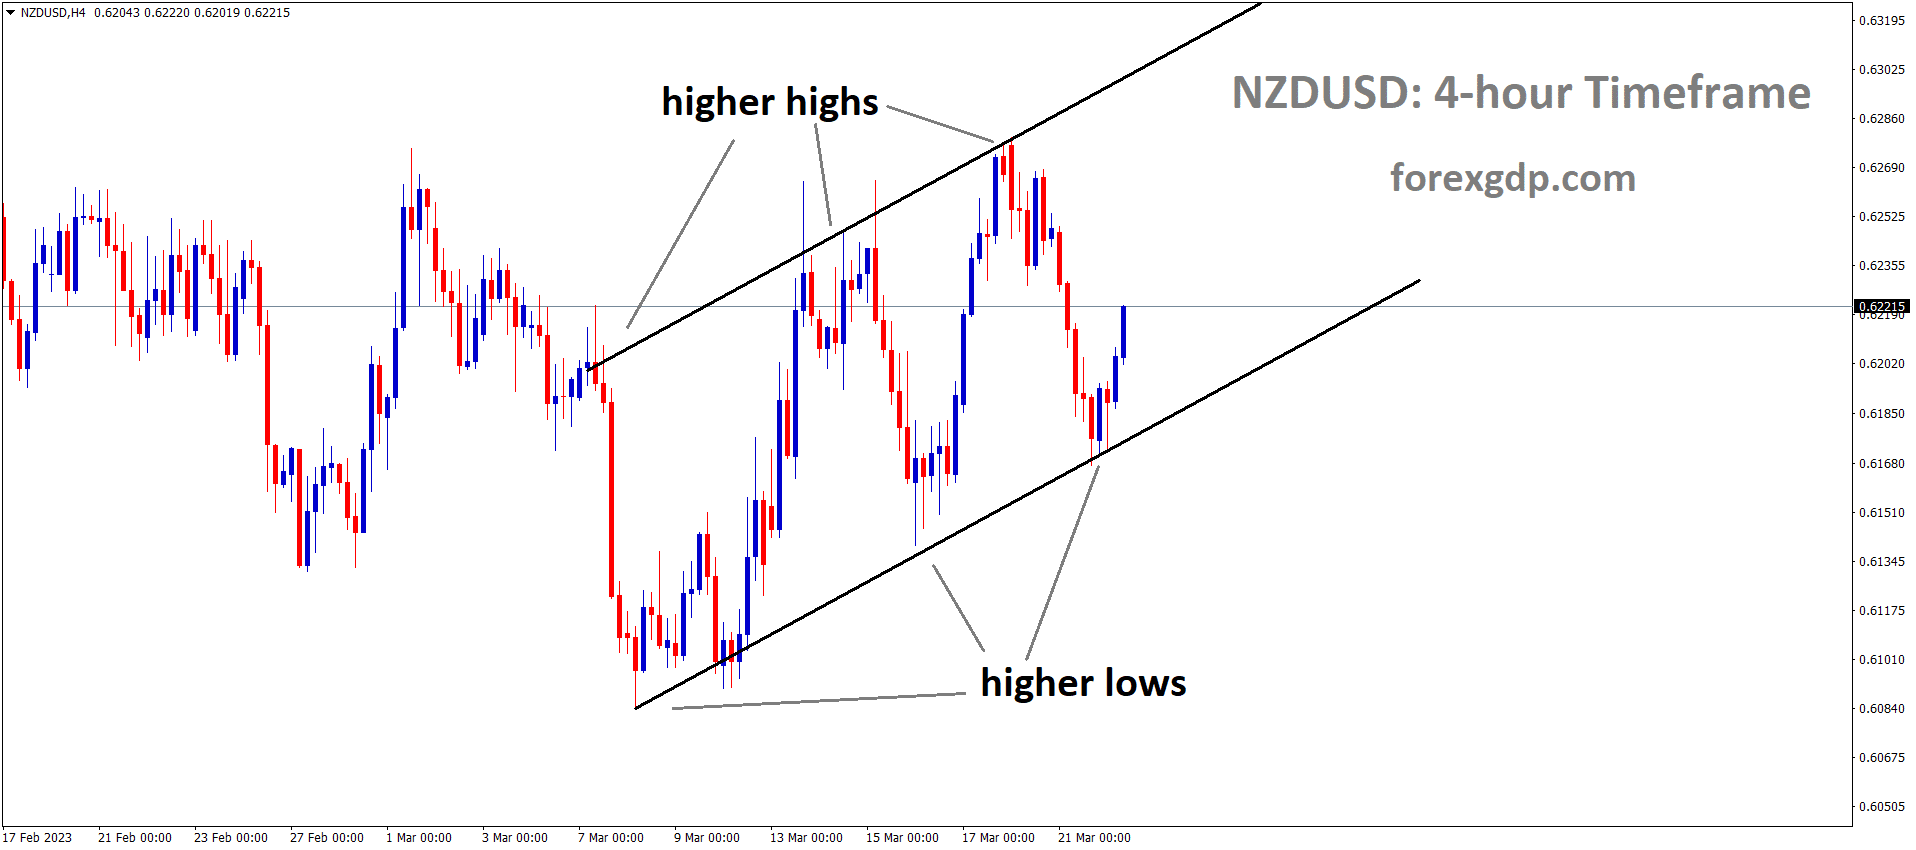 NZDUSD is moving in an Ascending channel and the market has rebounded from the higher low area of the channel